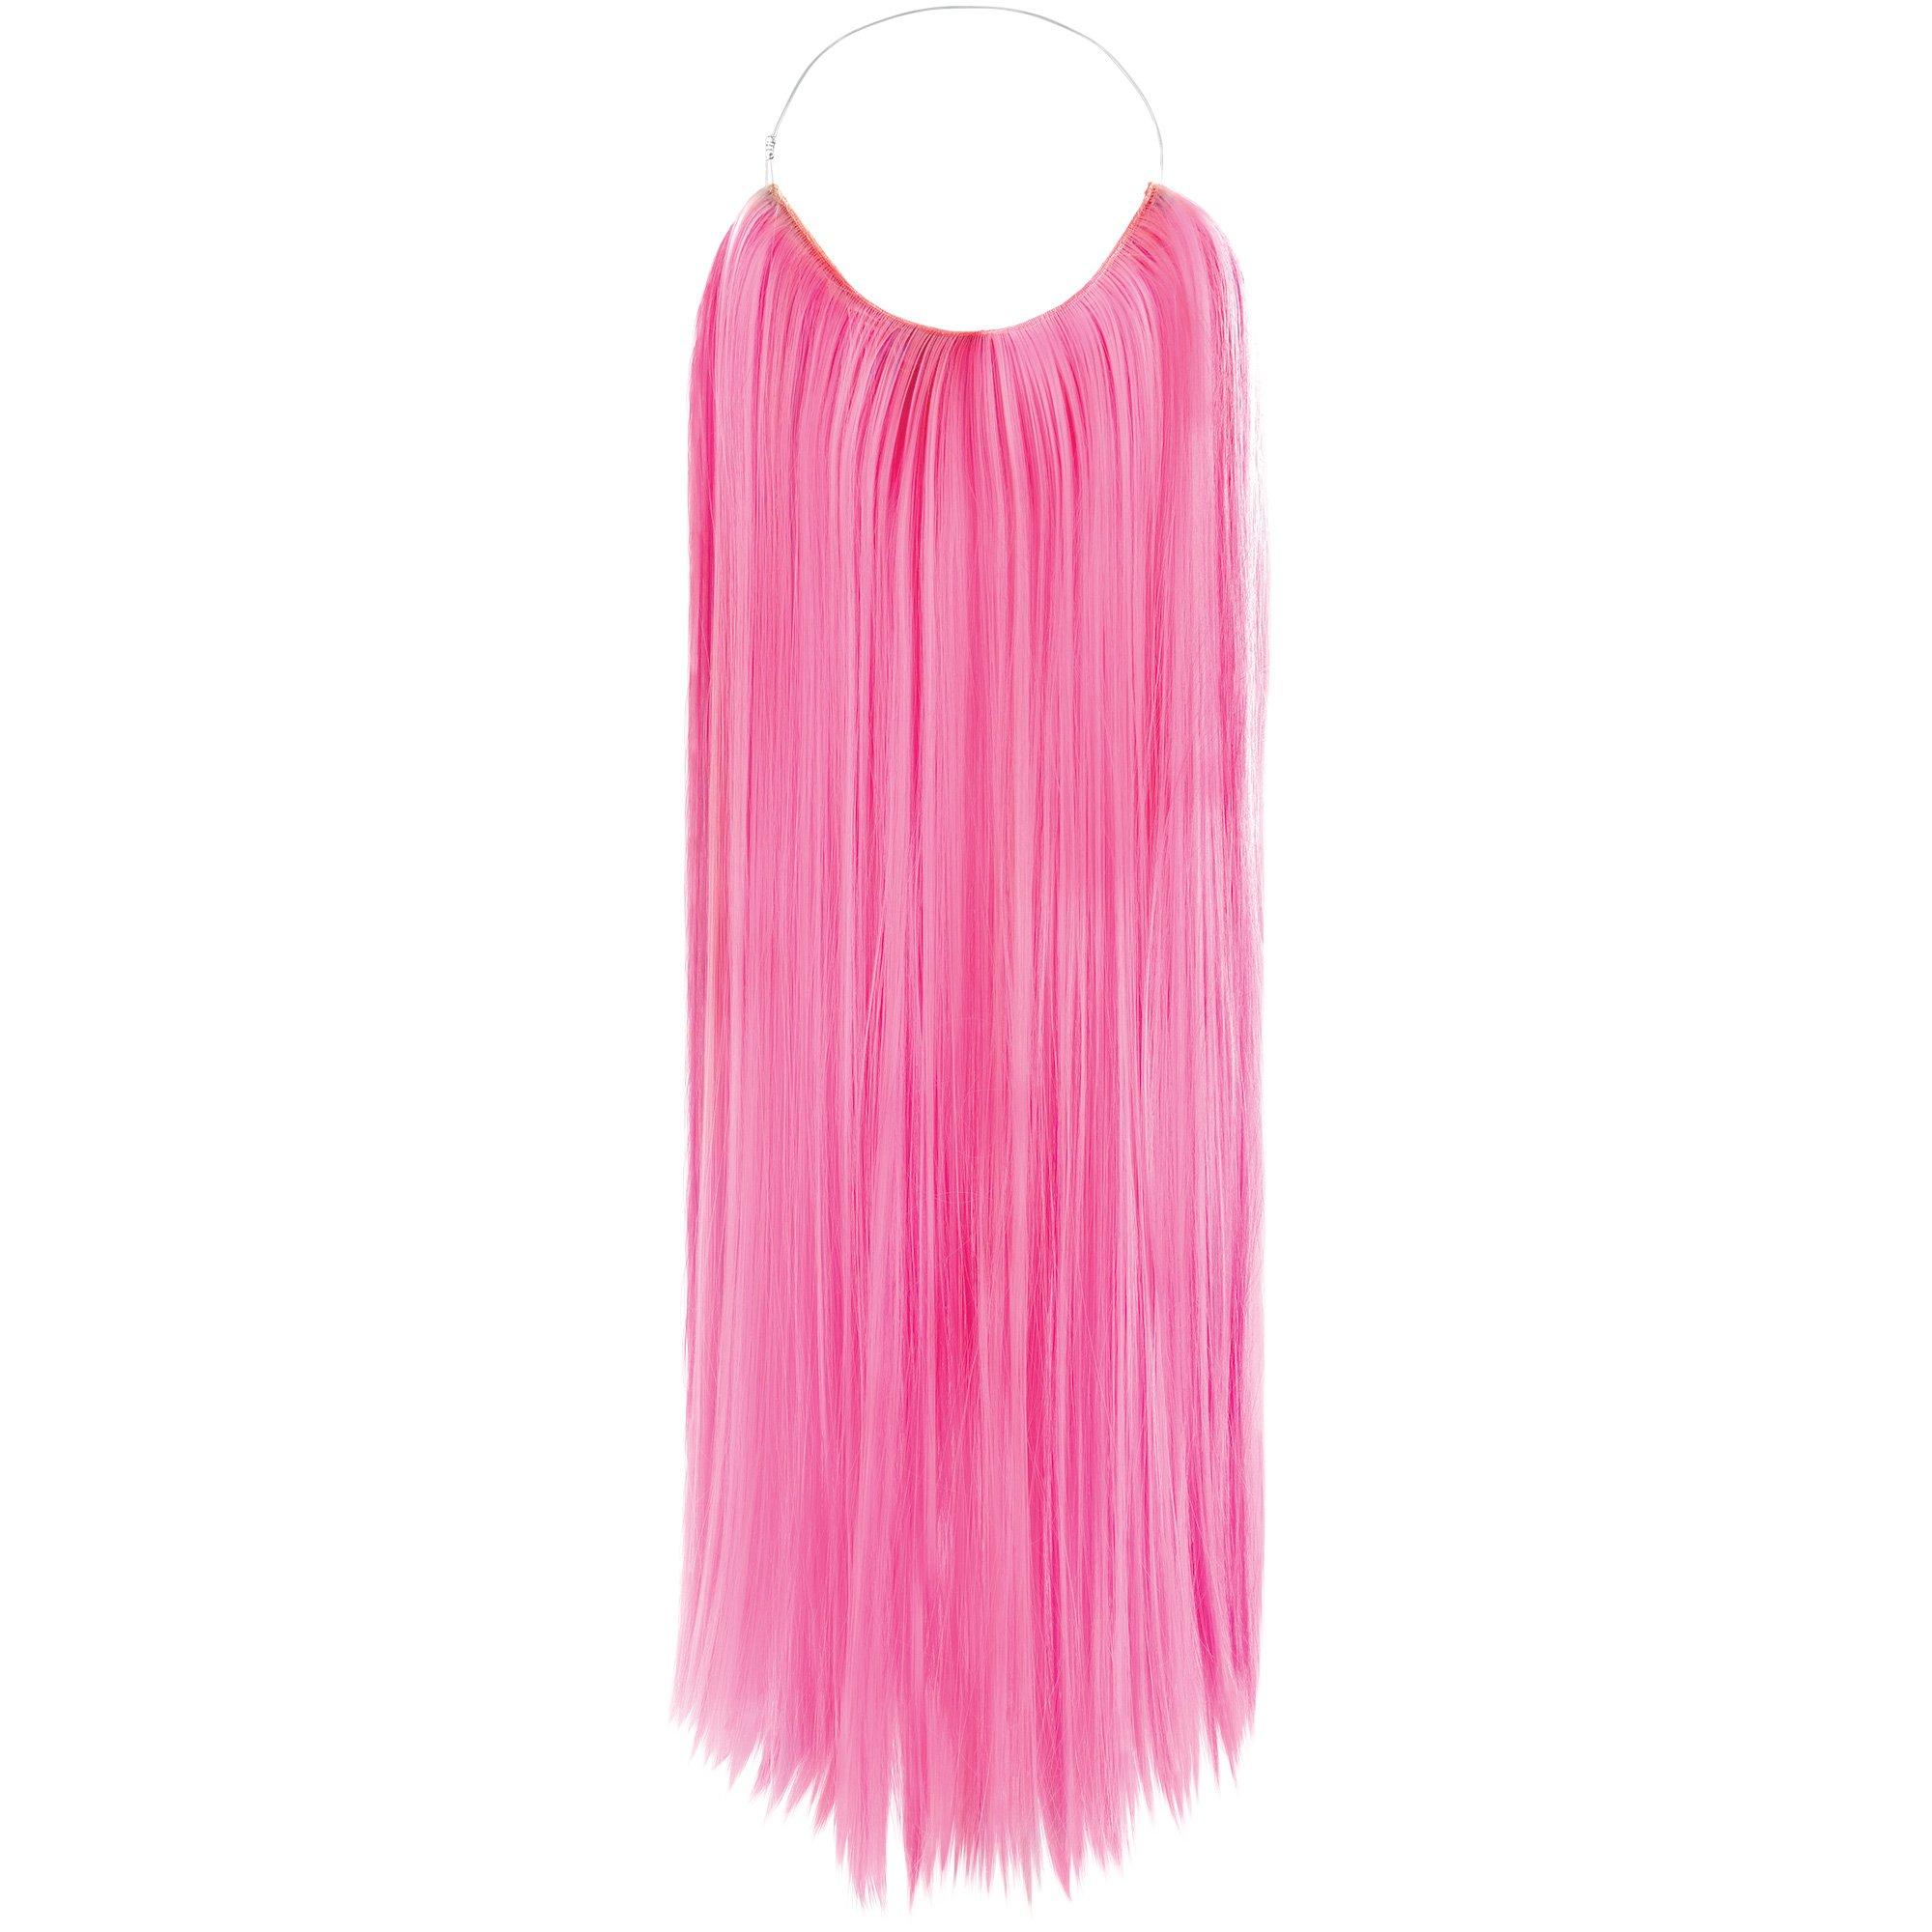 Neon Pink Hair Extension, 25in